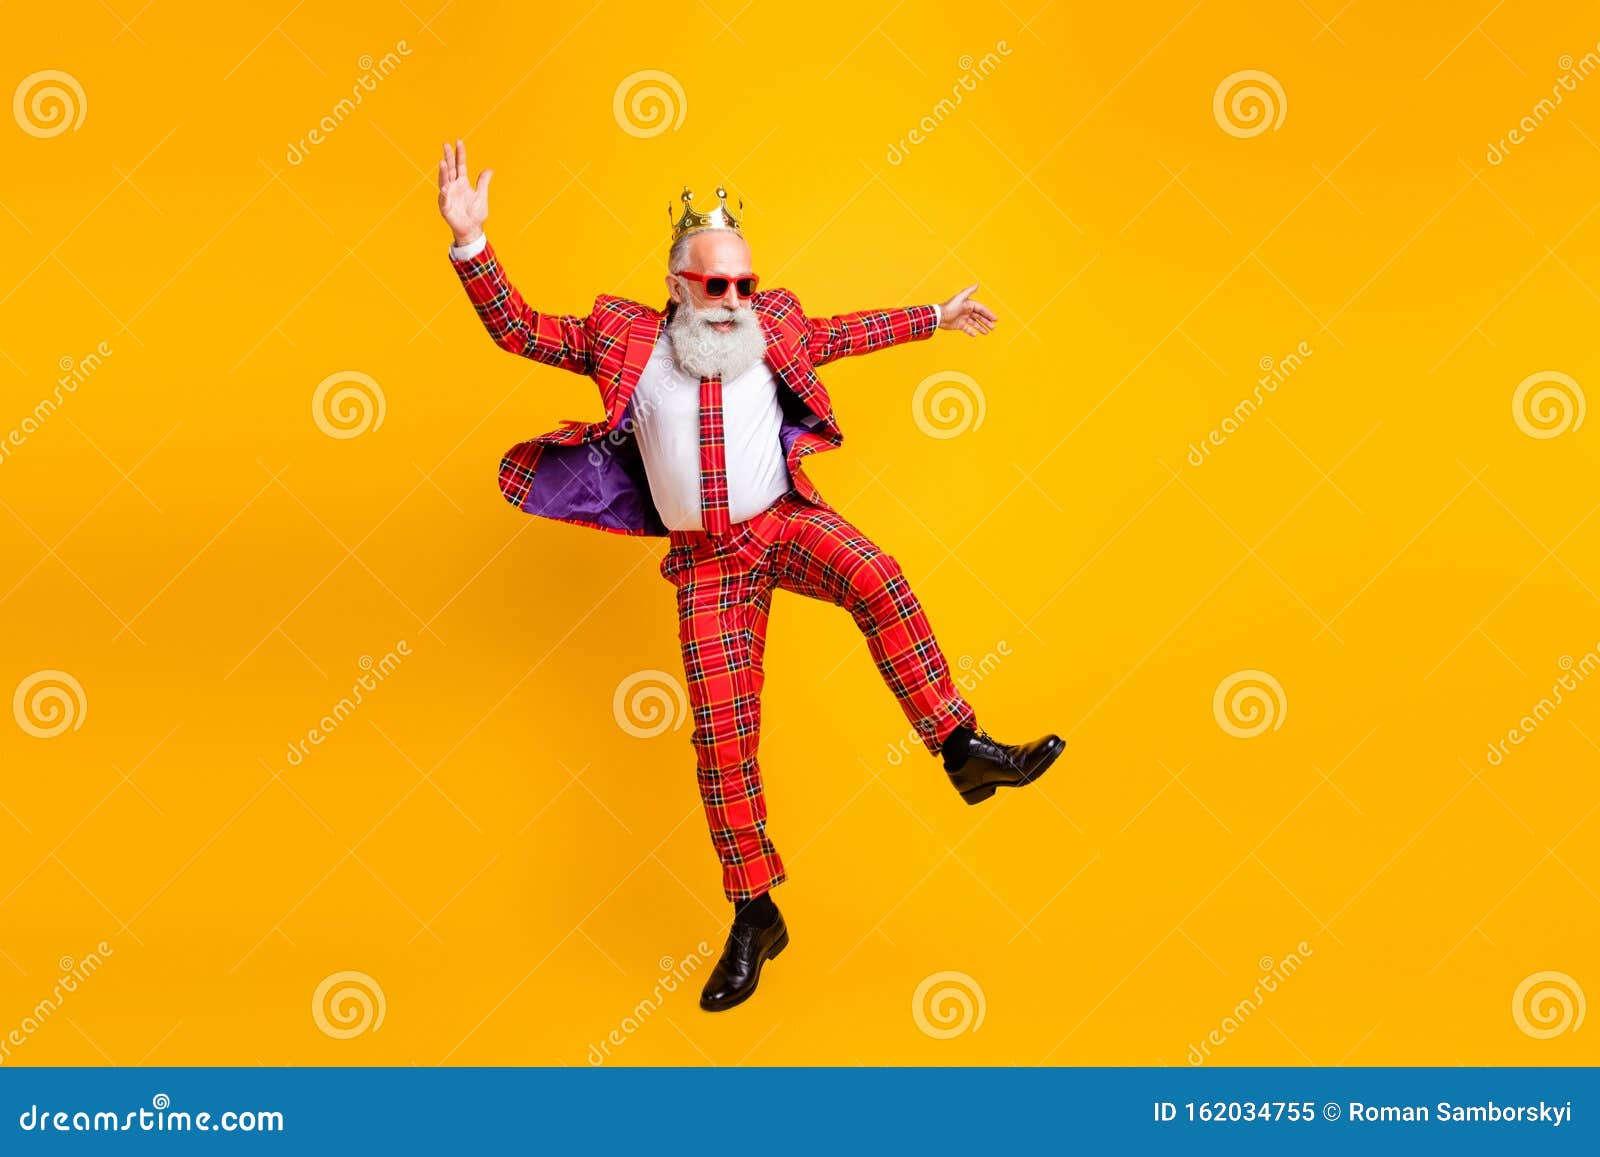 Just Dance. Full Body Photo of Funny Grandpa White Beard Dancing Youngster  Moves Little Drunk Wear Crown Sun Specs Stock Image - Image of model,  funky: 162034755